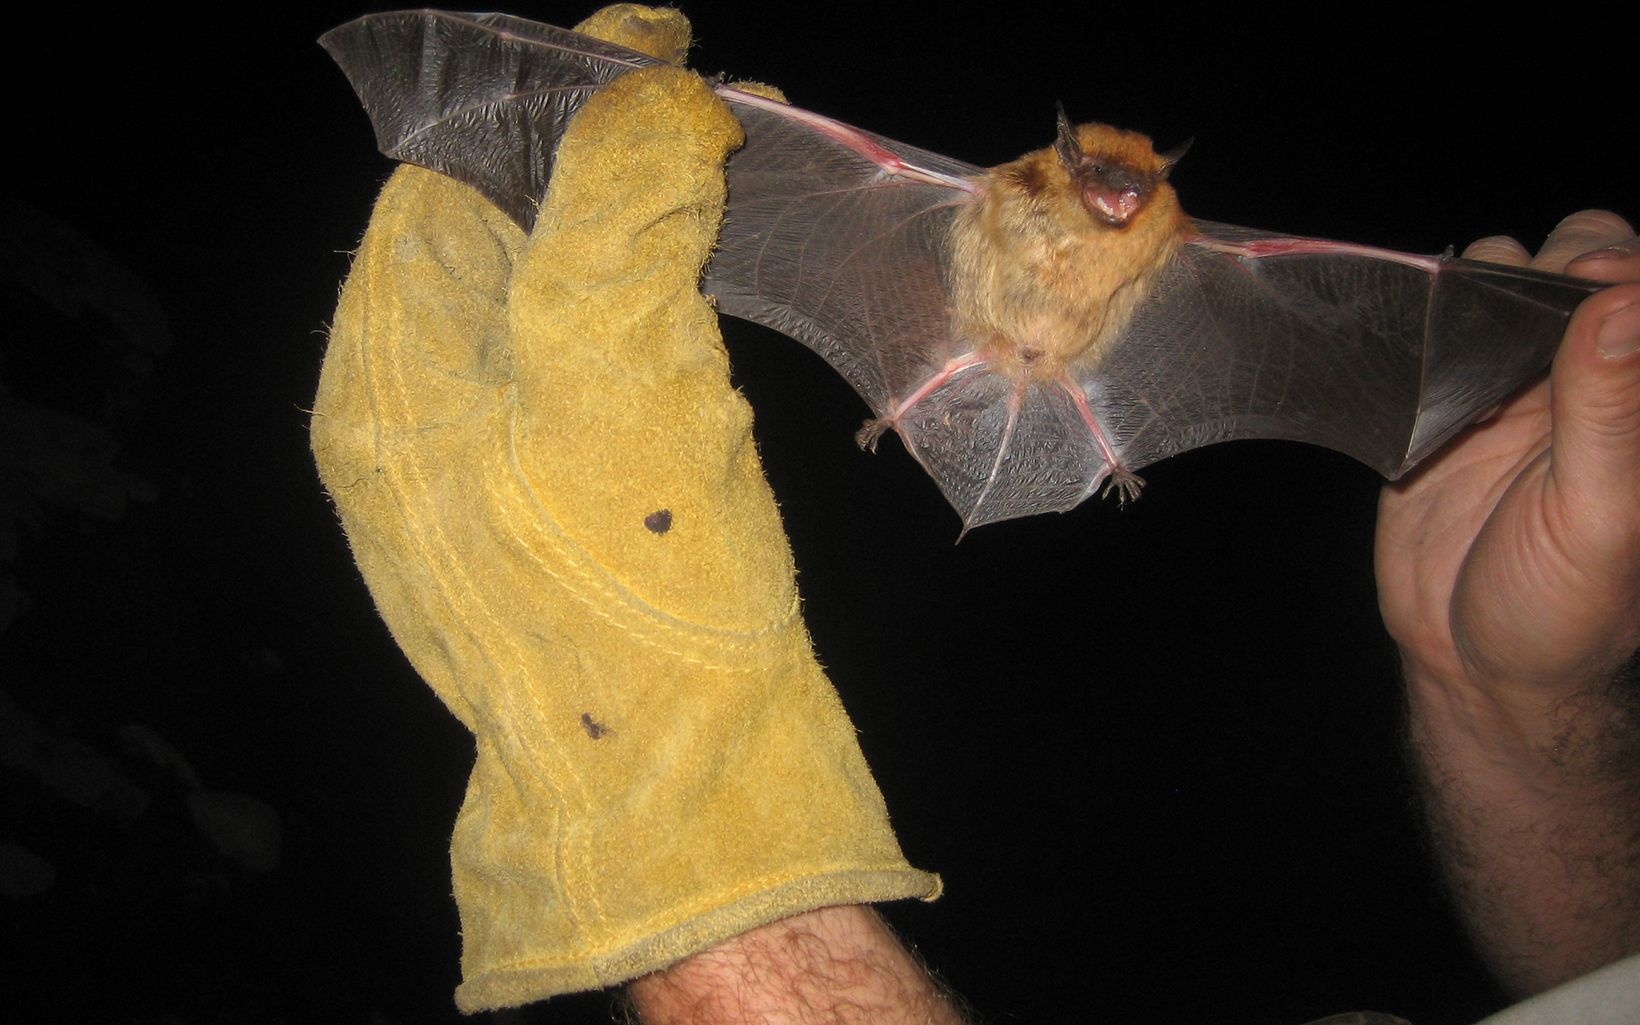 Bat held by its wings by a yellow gloved hand.